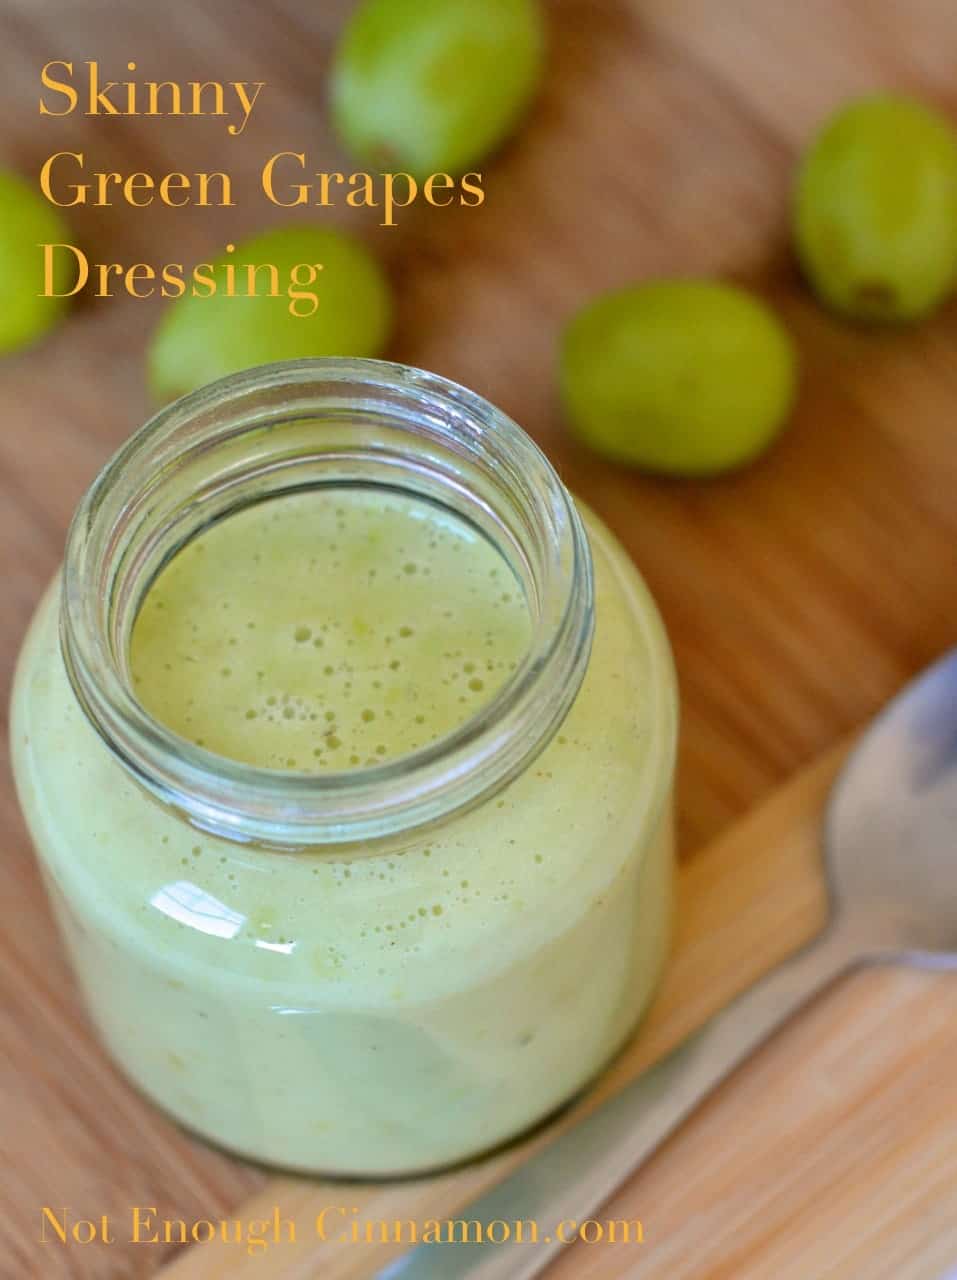 Skinny Dressing with Green Grapes in a mason jar with some seedless grapes in the background